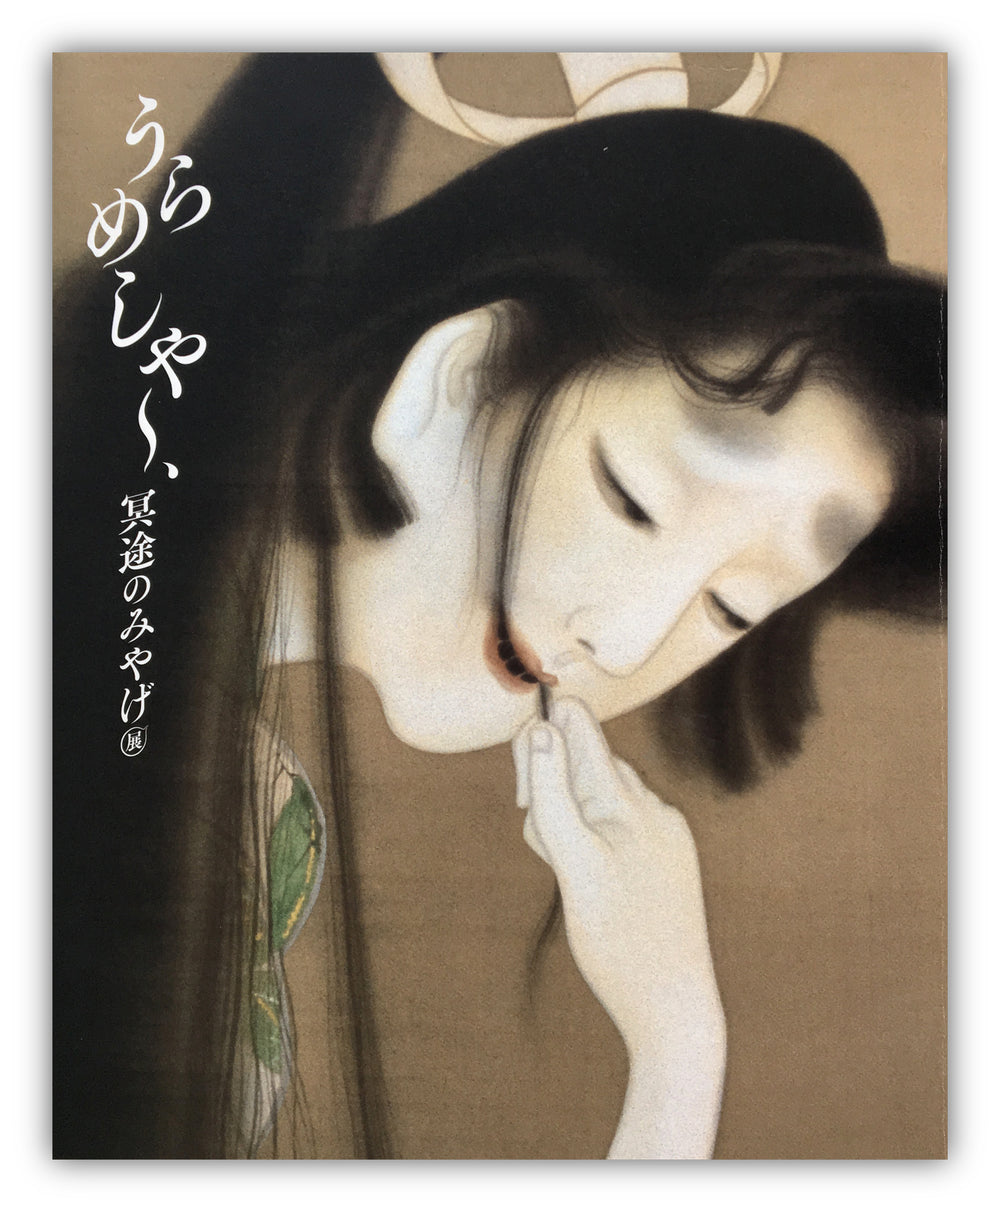 URAMESHIYA… ART OF THE GHOST - Featuring Zenshōan’s Sanyūtei Enchō Collection of Ghost Paintings